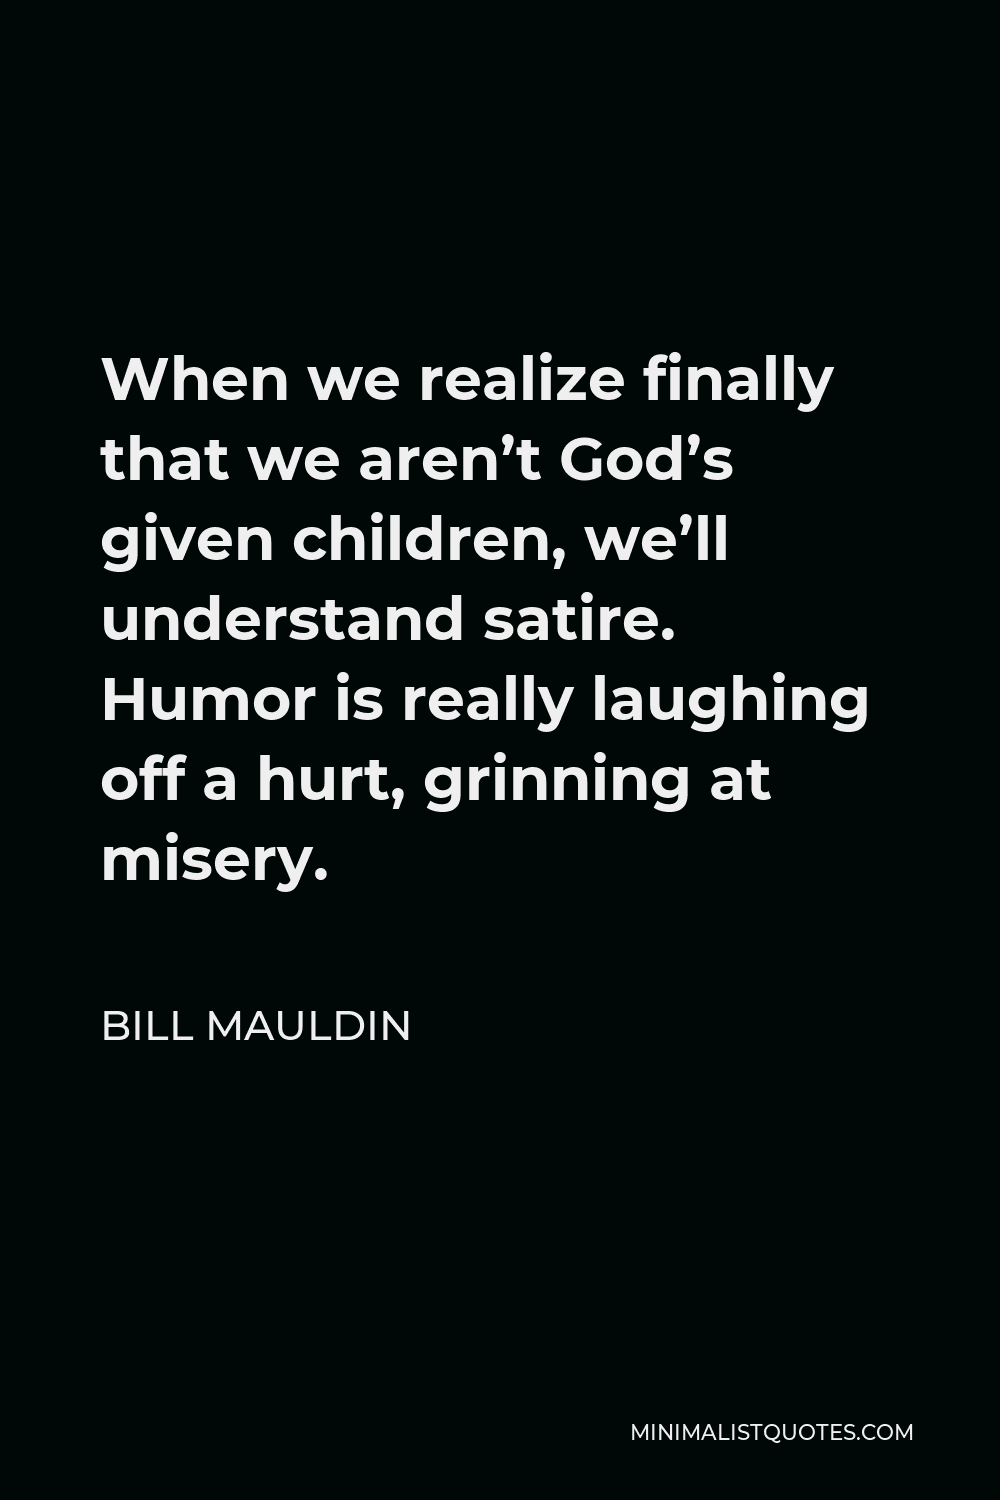 Bill Mauldin Quote - When we realize finally that we aren’t God’s given children, we’ll understand satire. Humor is really laughing off a hurt, grinning at misery.